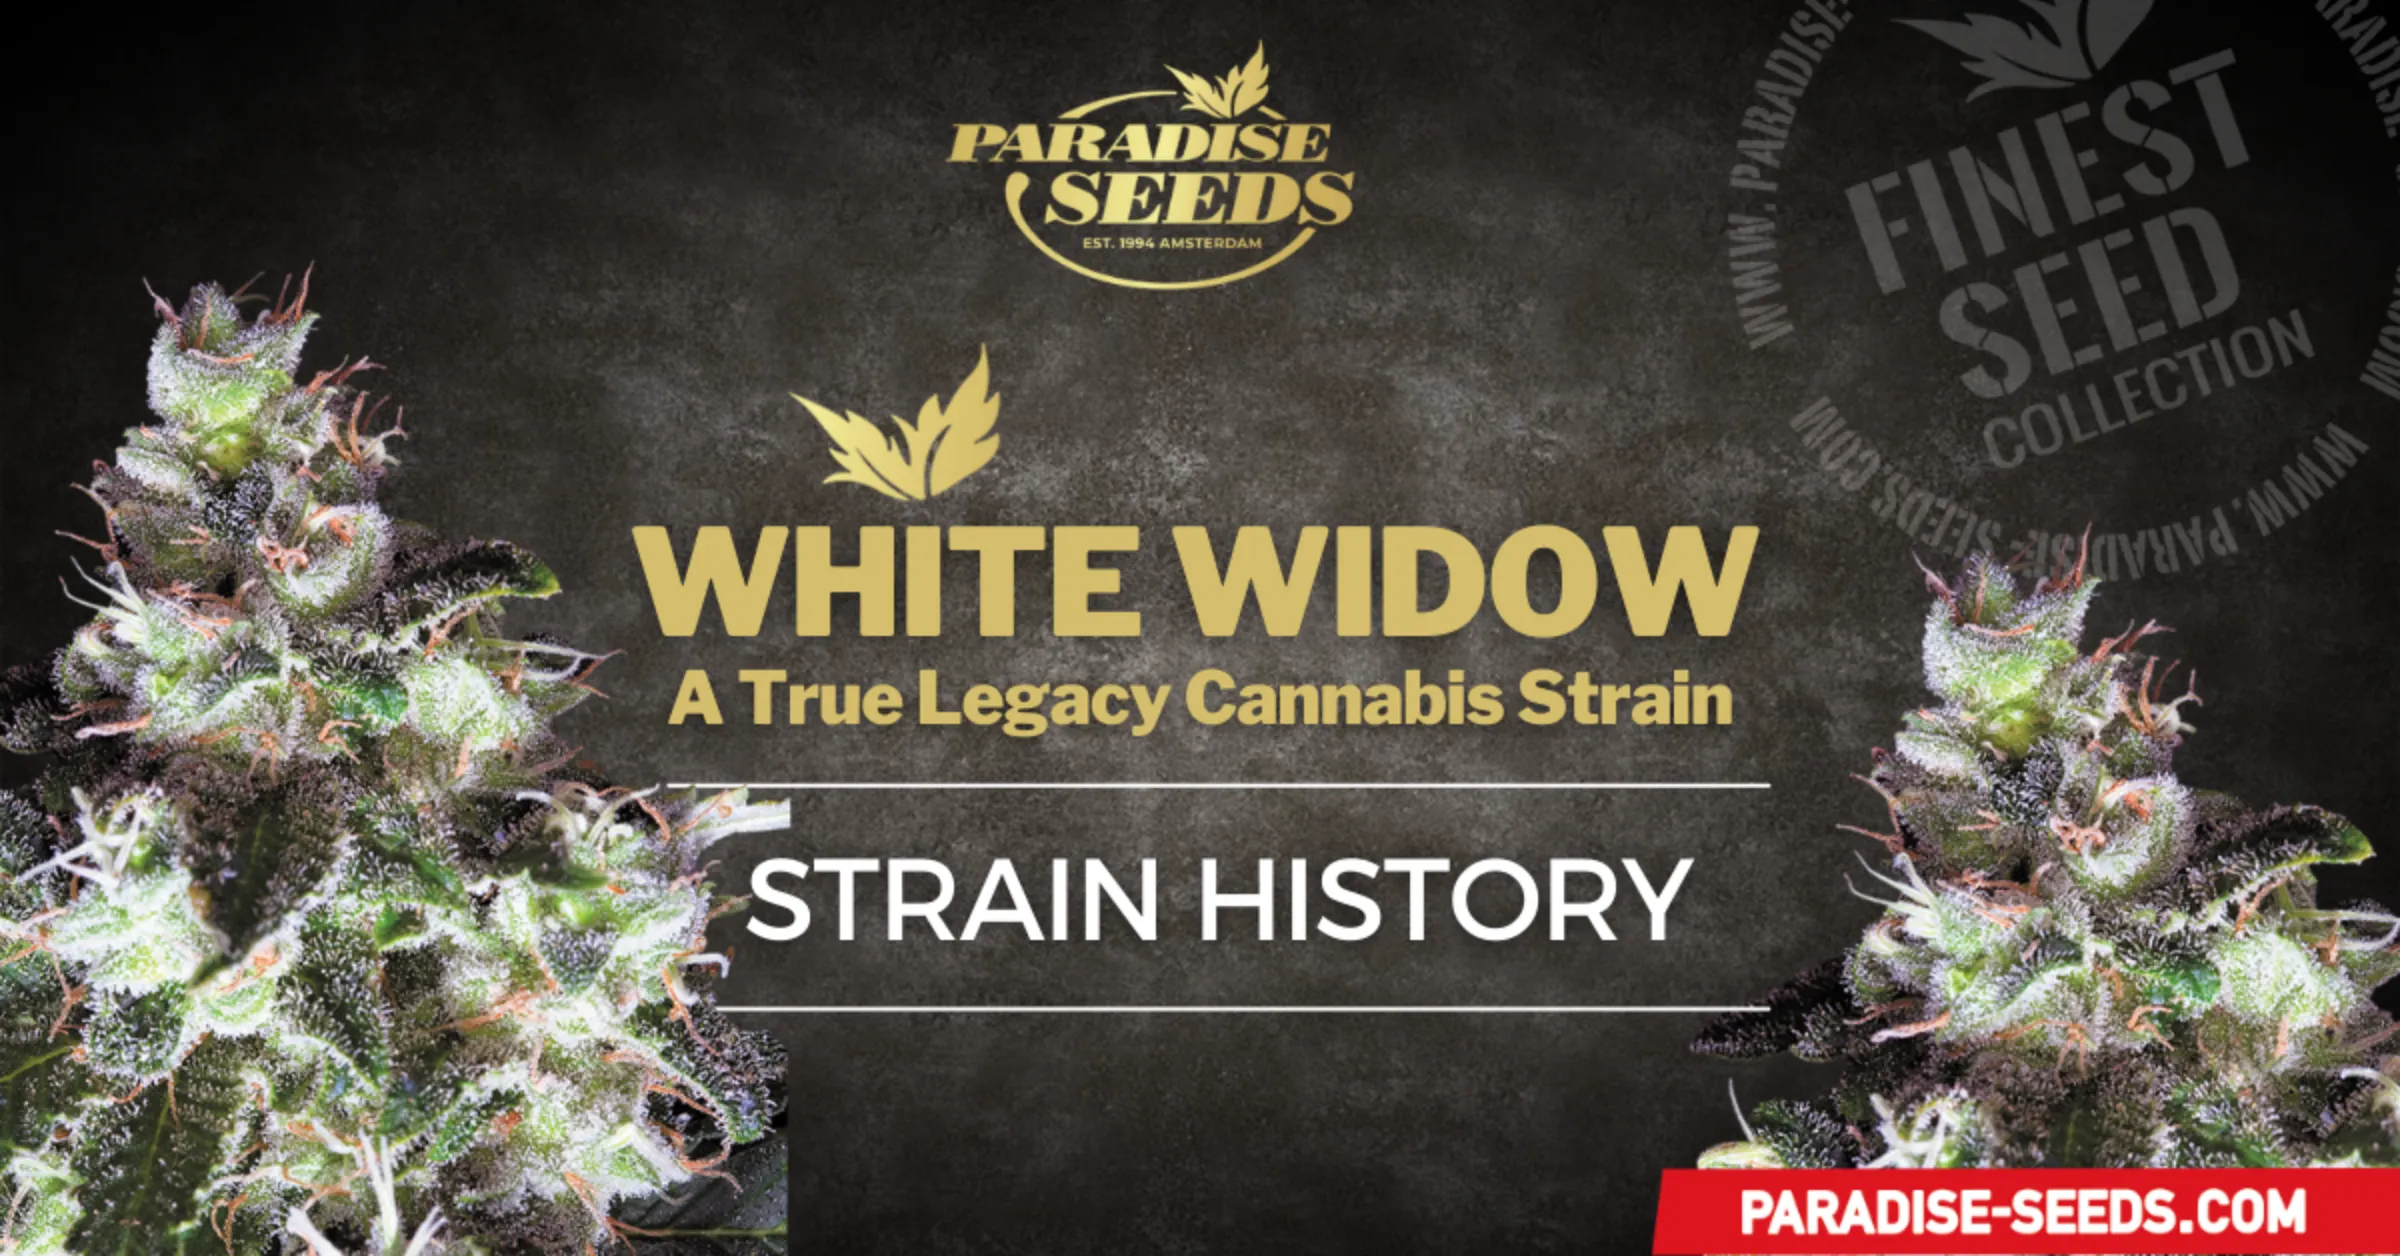 The History of the White Widow Strain